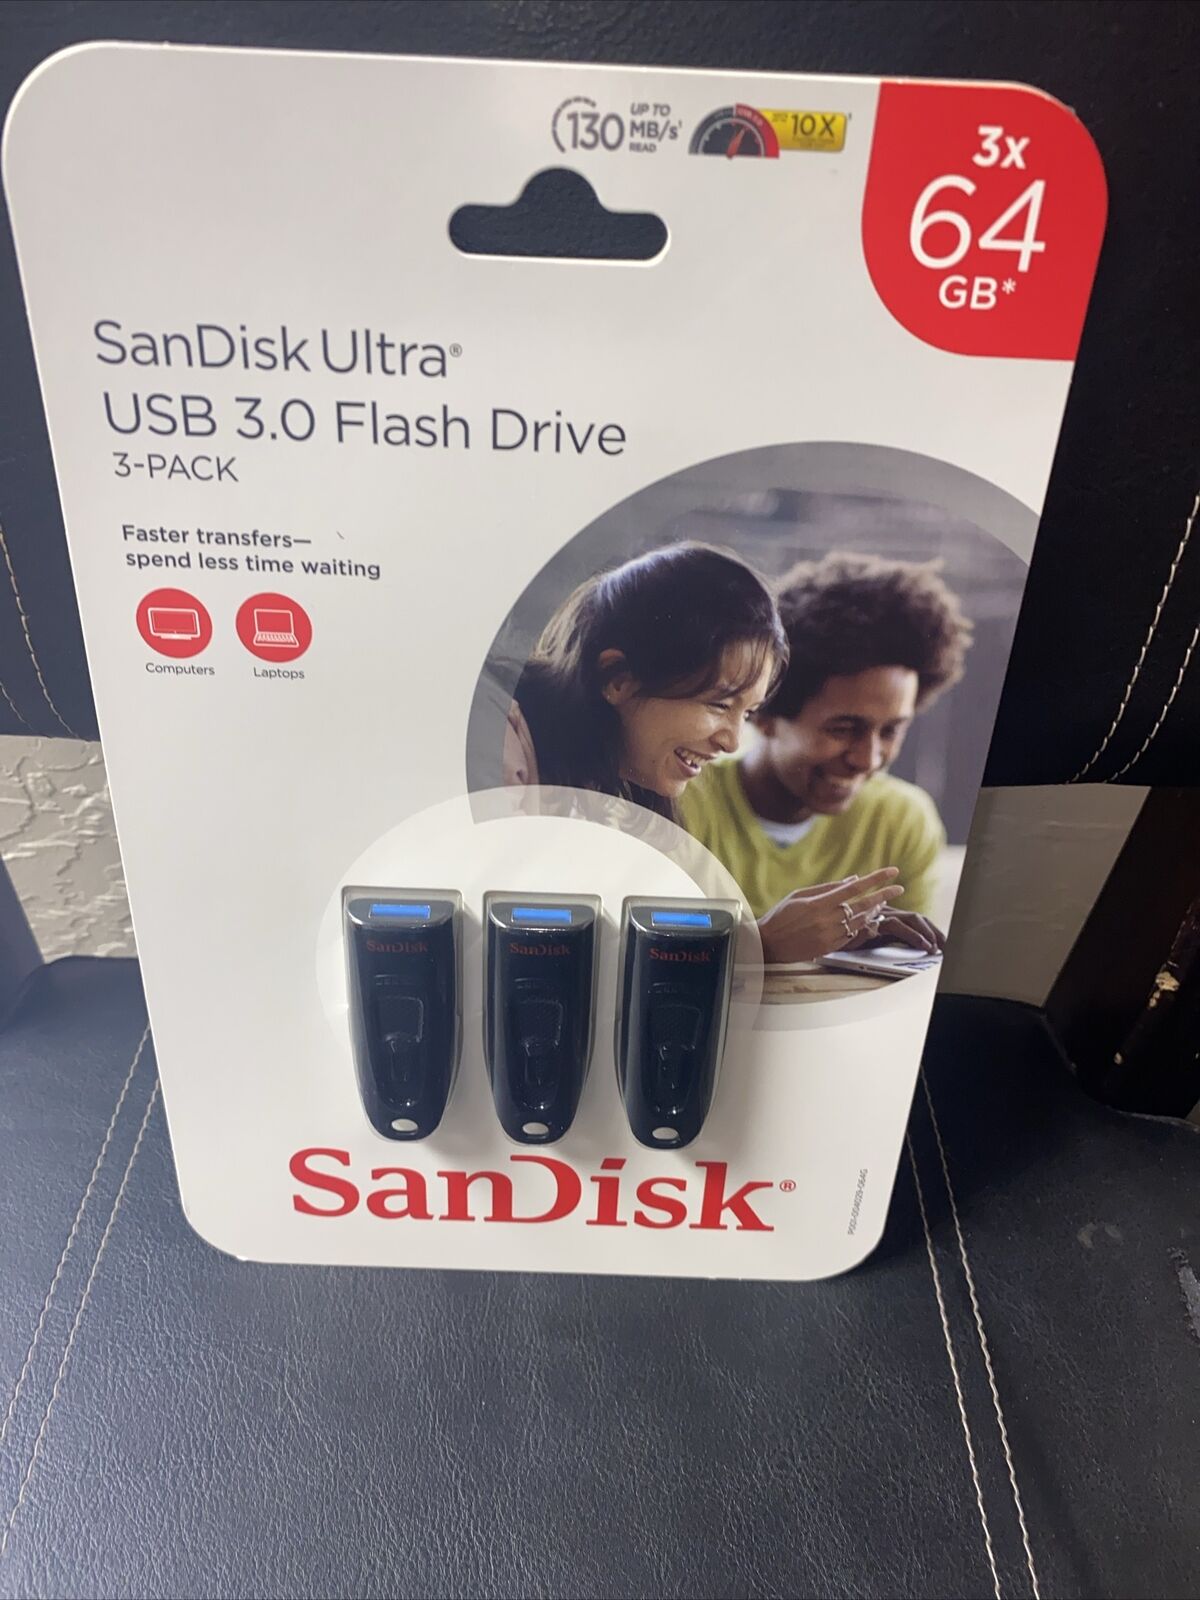 3 pack SanDisk 64gb USB 3.0 Flash Drive - Black NEW in Retail sealed carded pkg